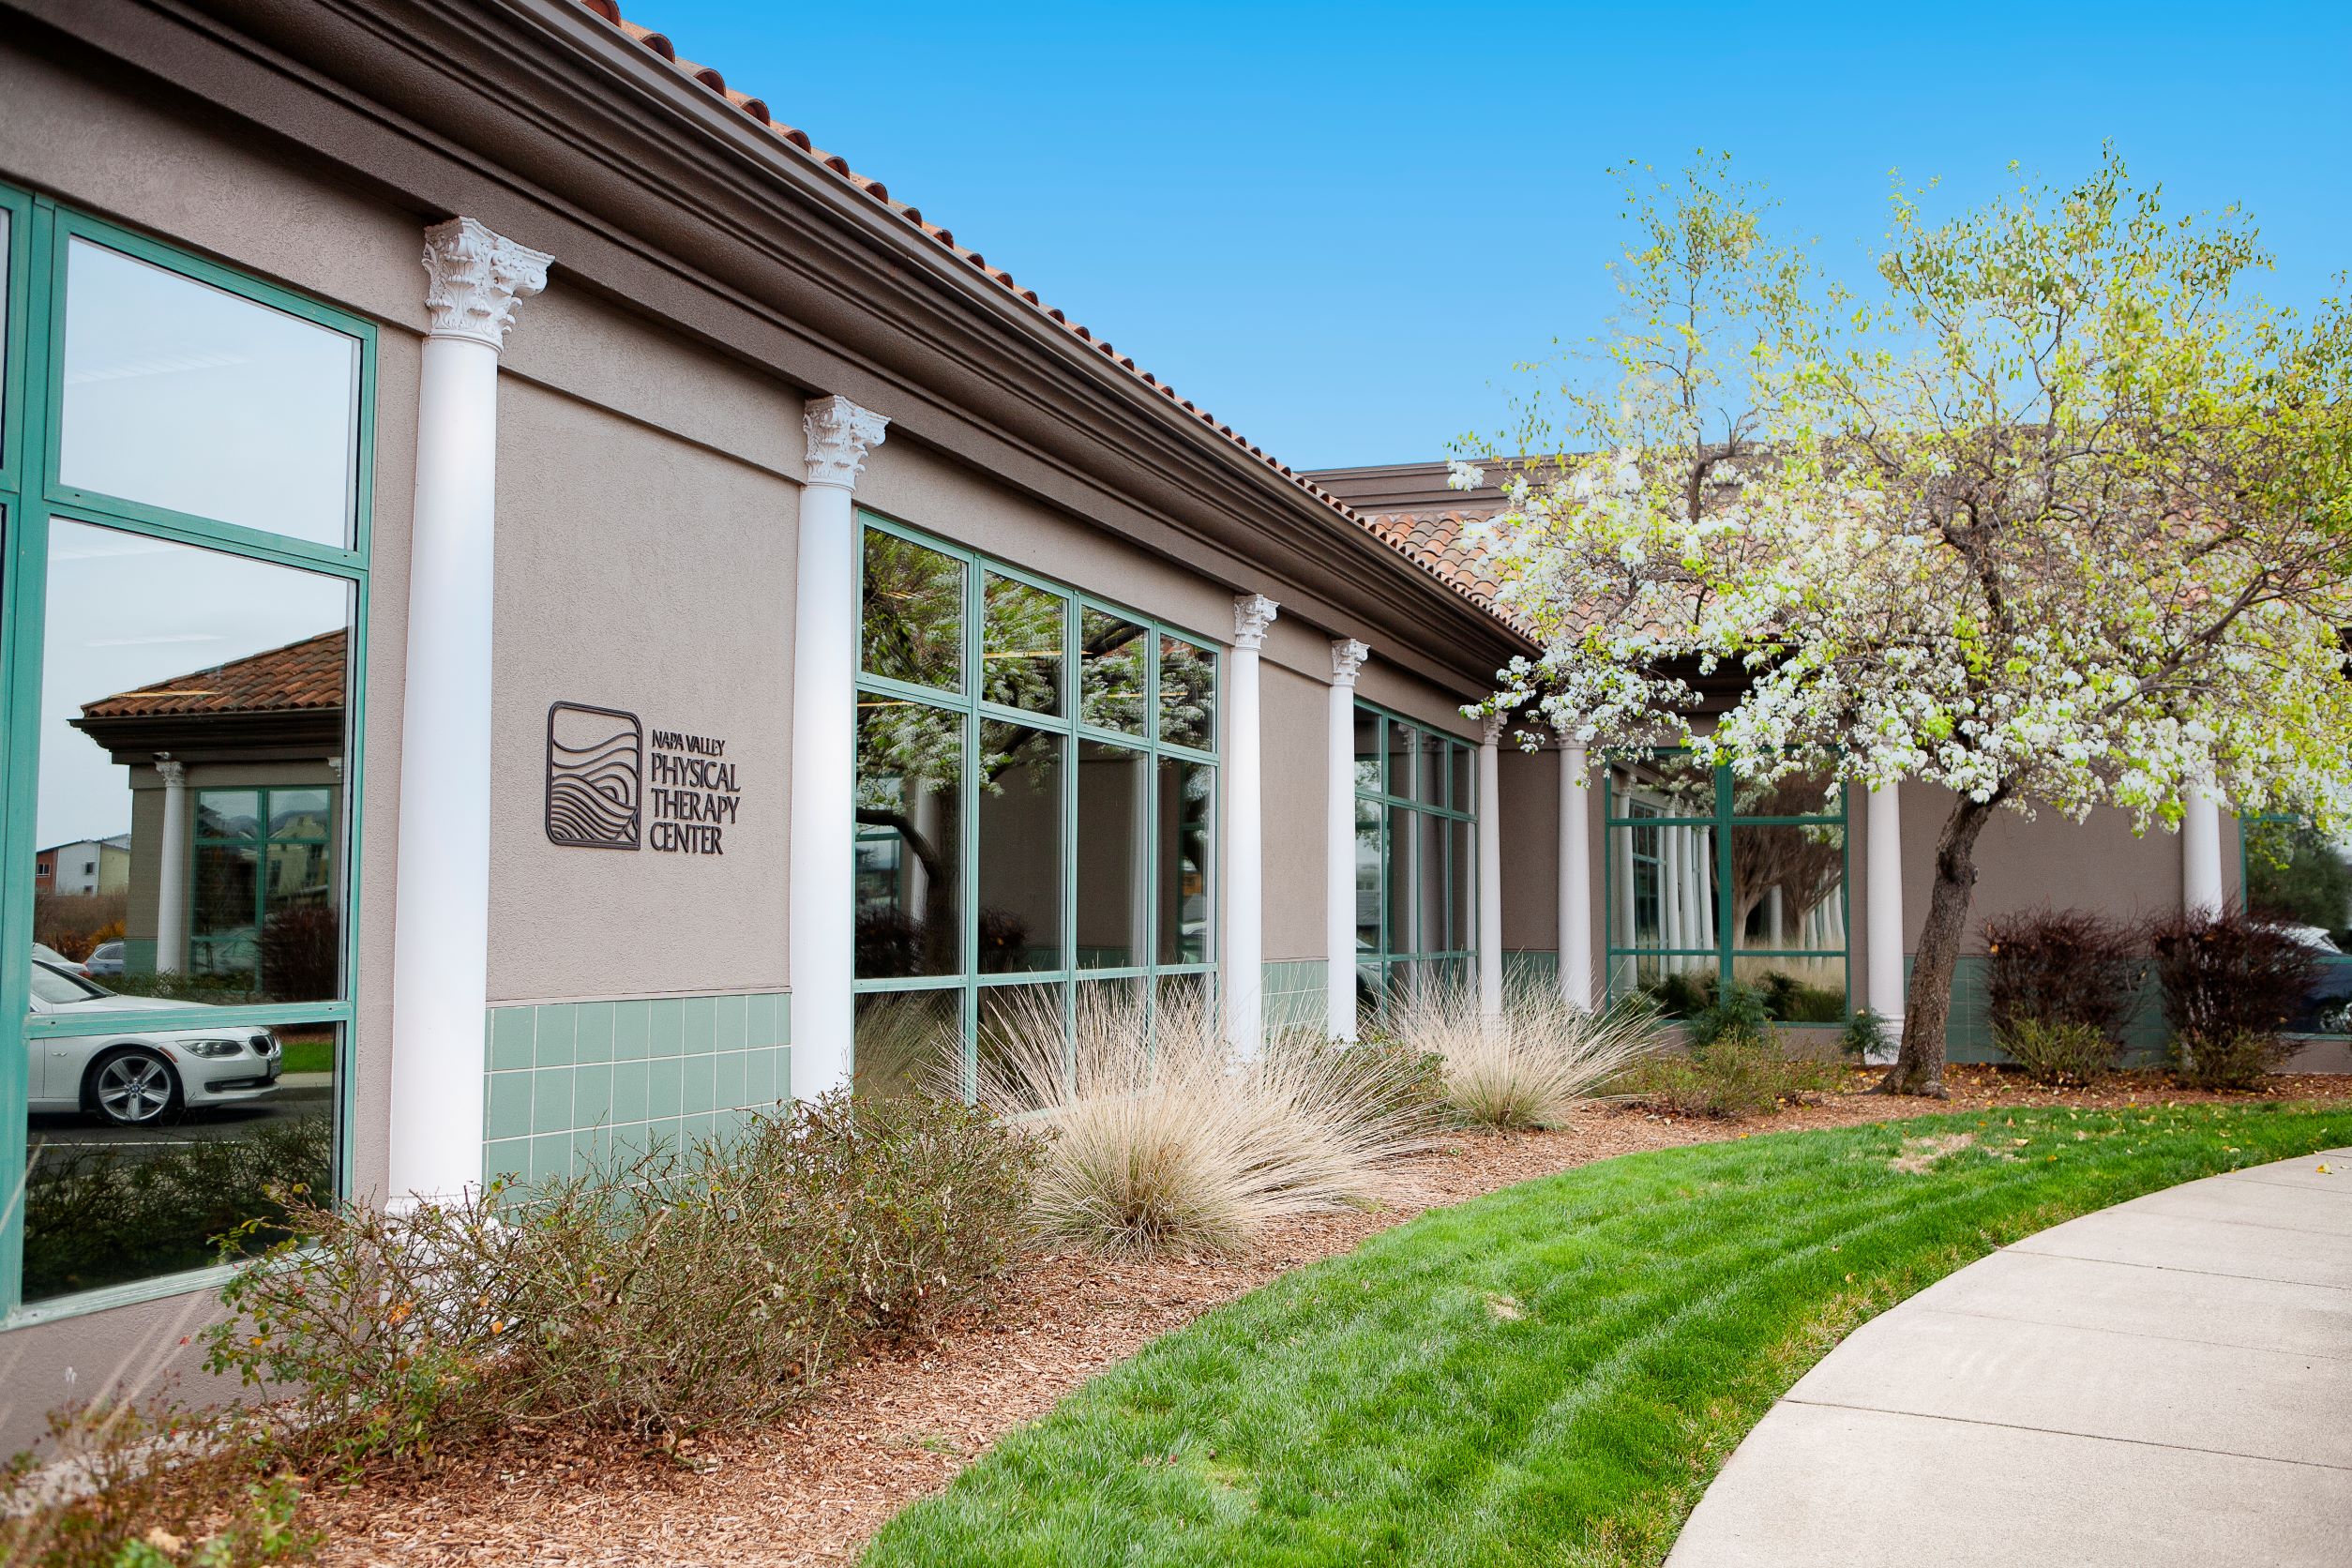 Exterior of Napa Valley Physical Therapy Center